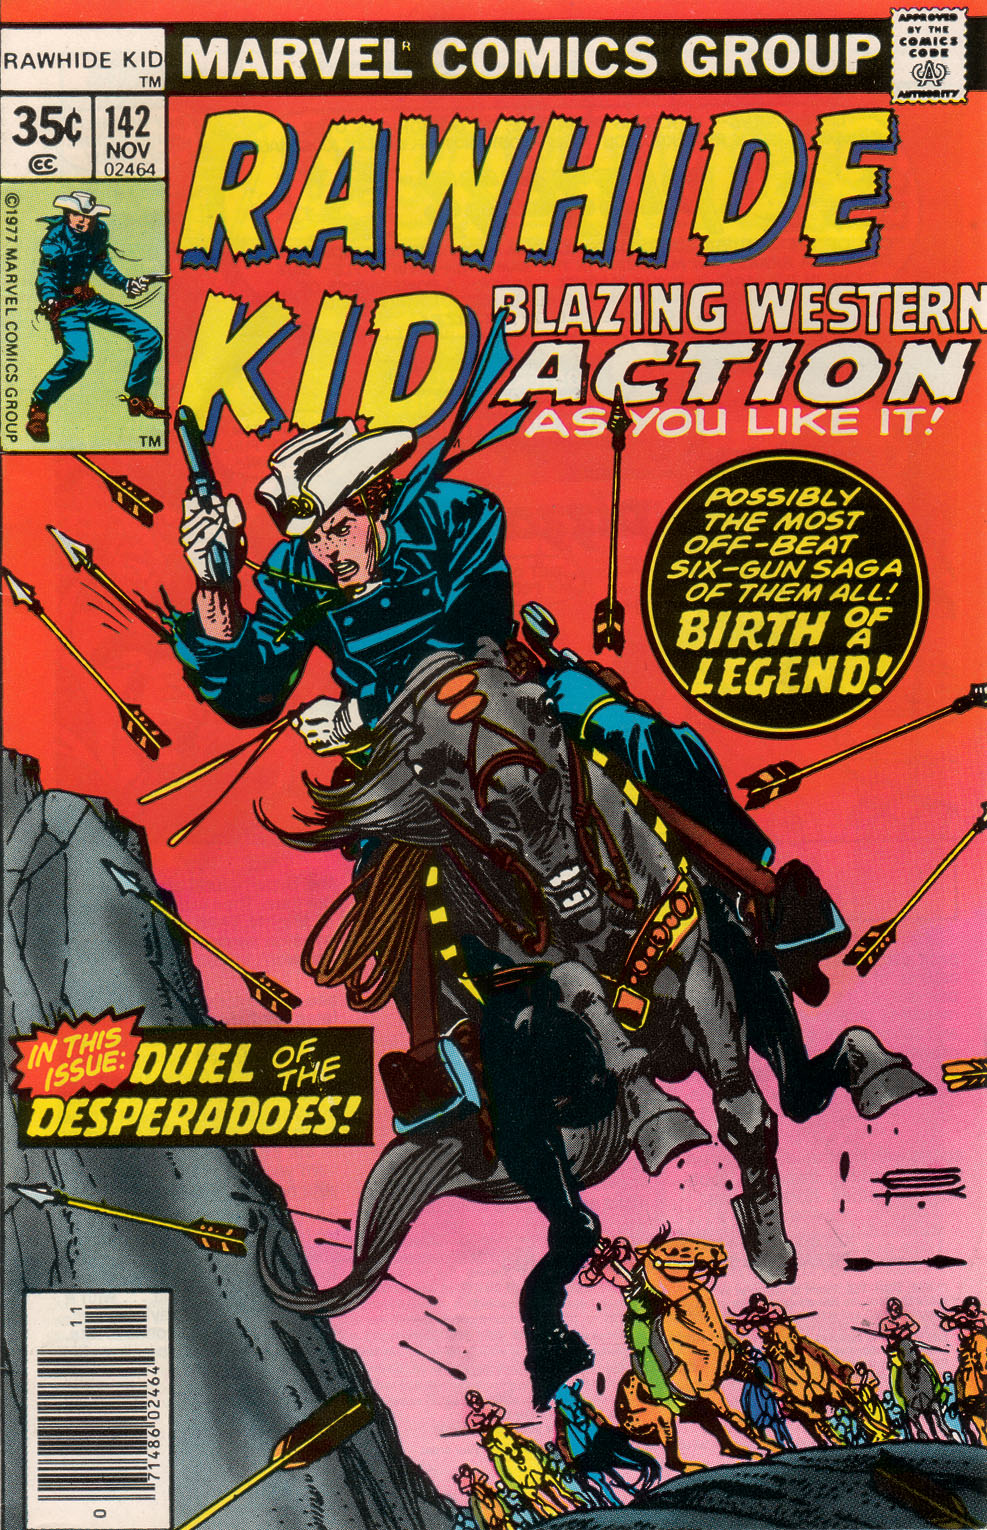 Read online The Rawhide Kid comic -  Issue #142 - 1